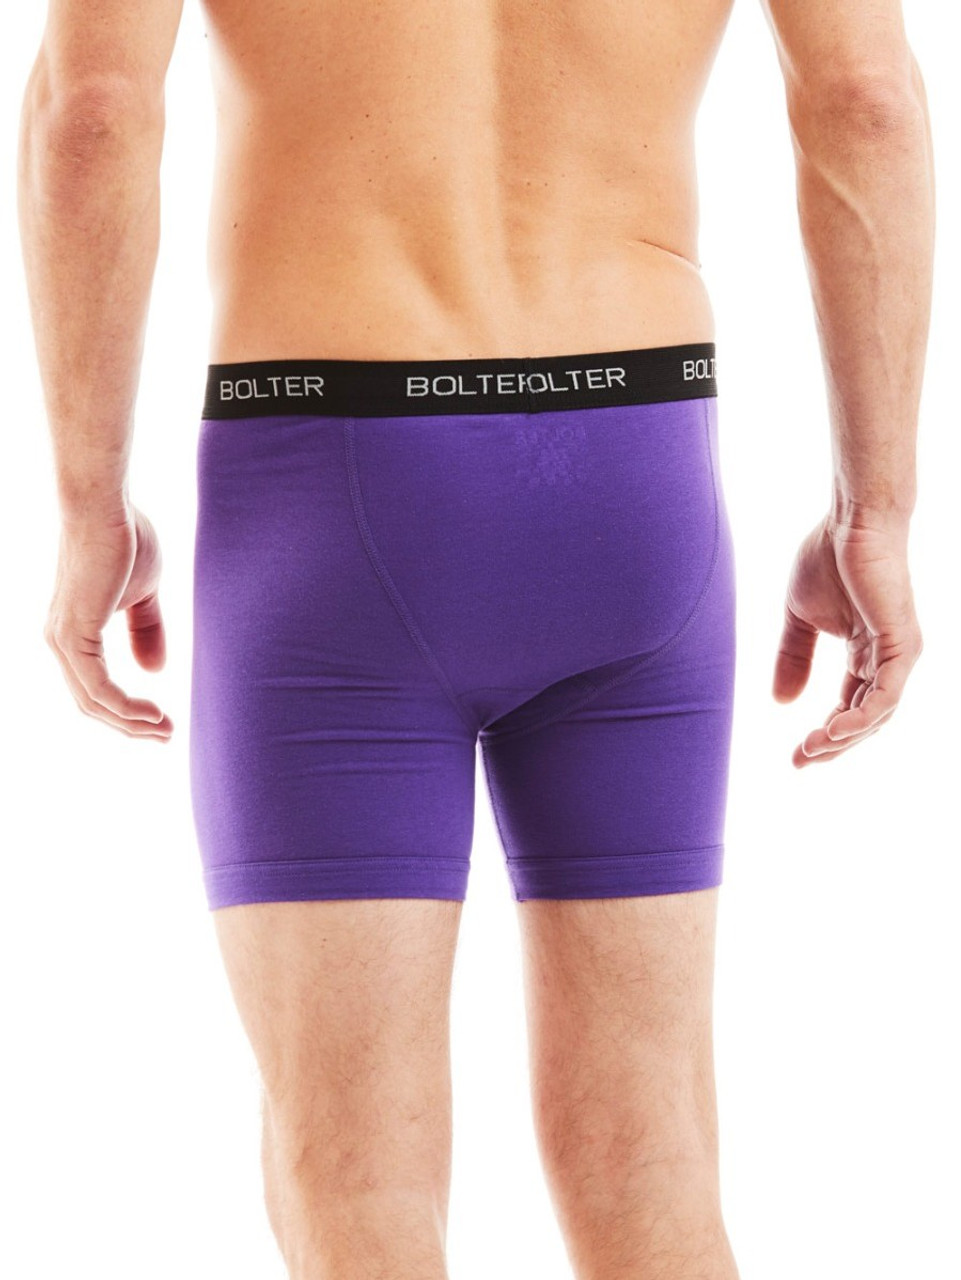 Performance Boxer Briefs - 4 Pack - Bolter